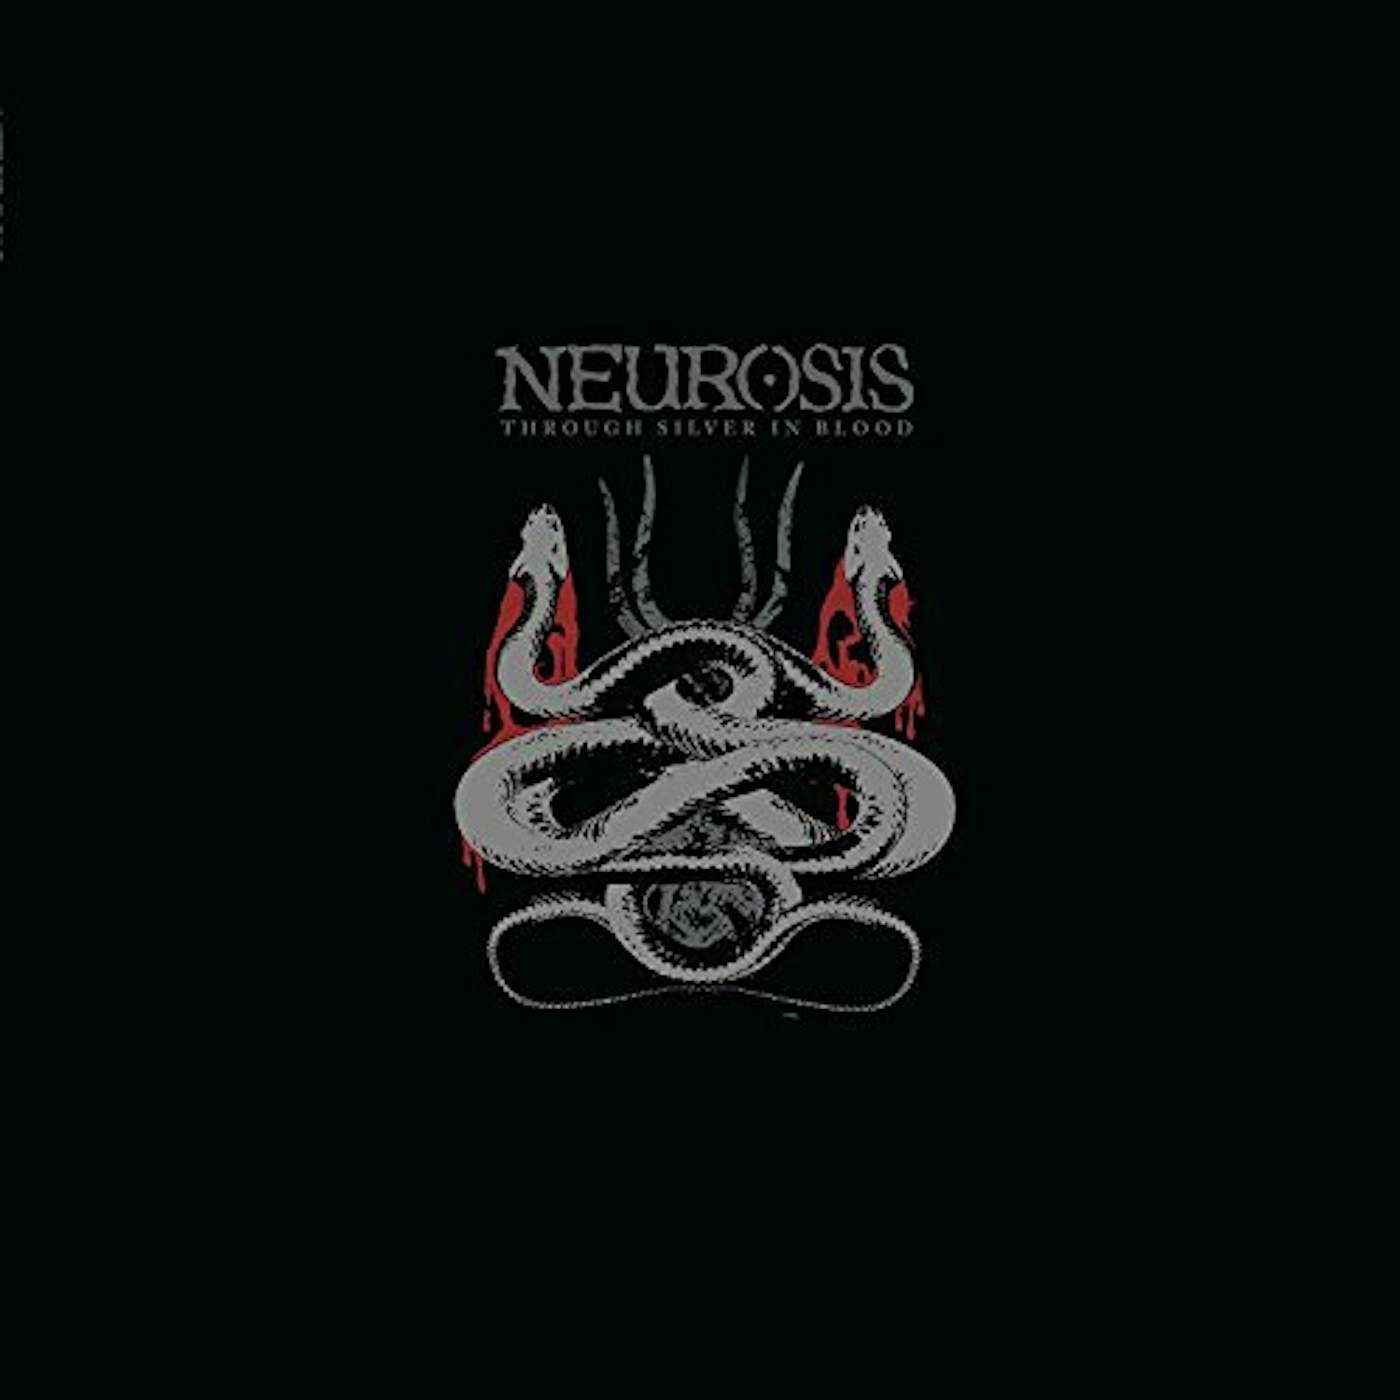 Neurosis THROUGH SILVER IN BLOOD Vinyl Record - UK Release